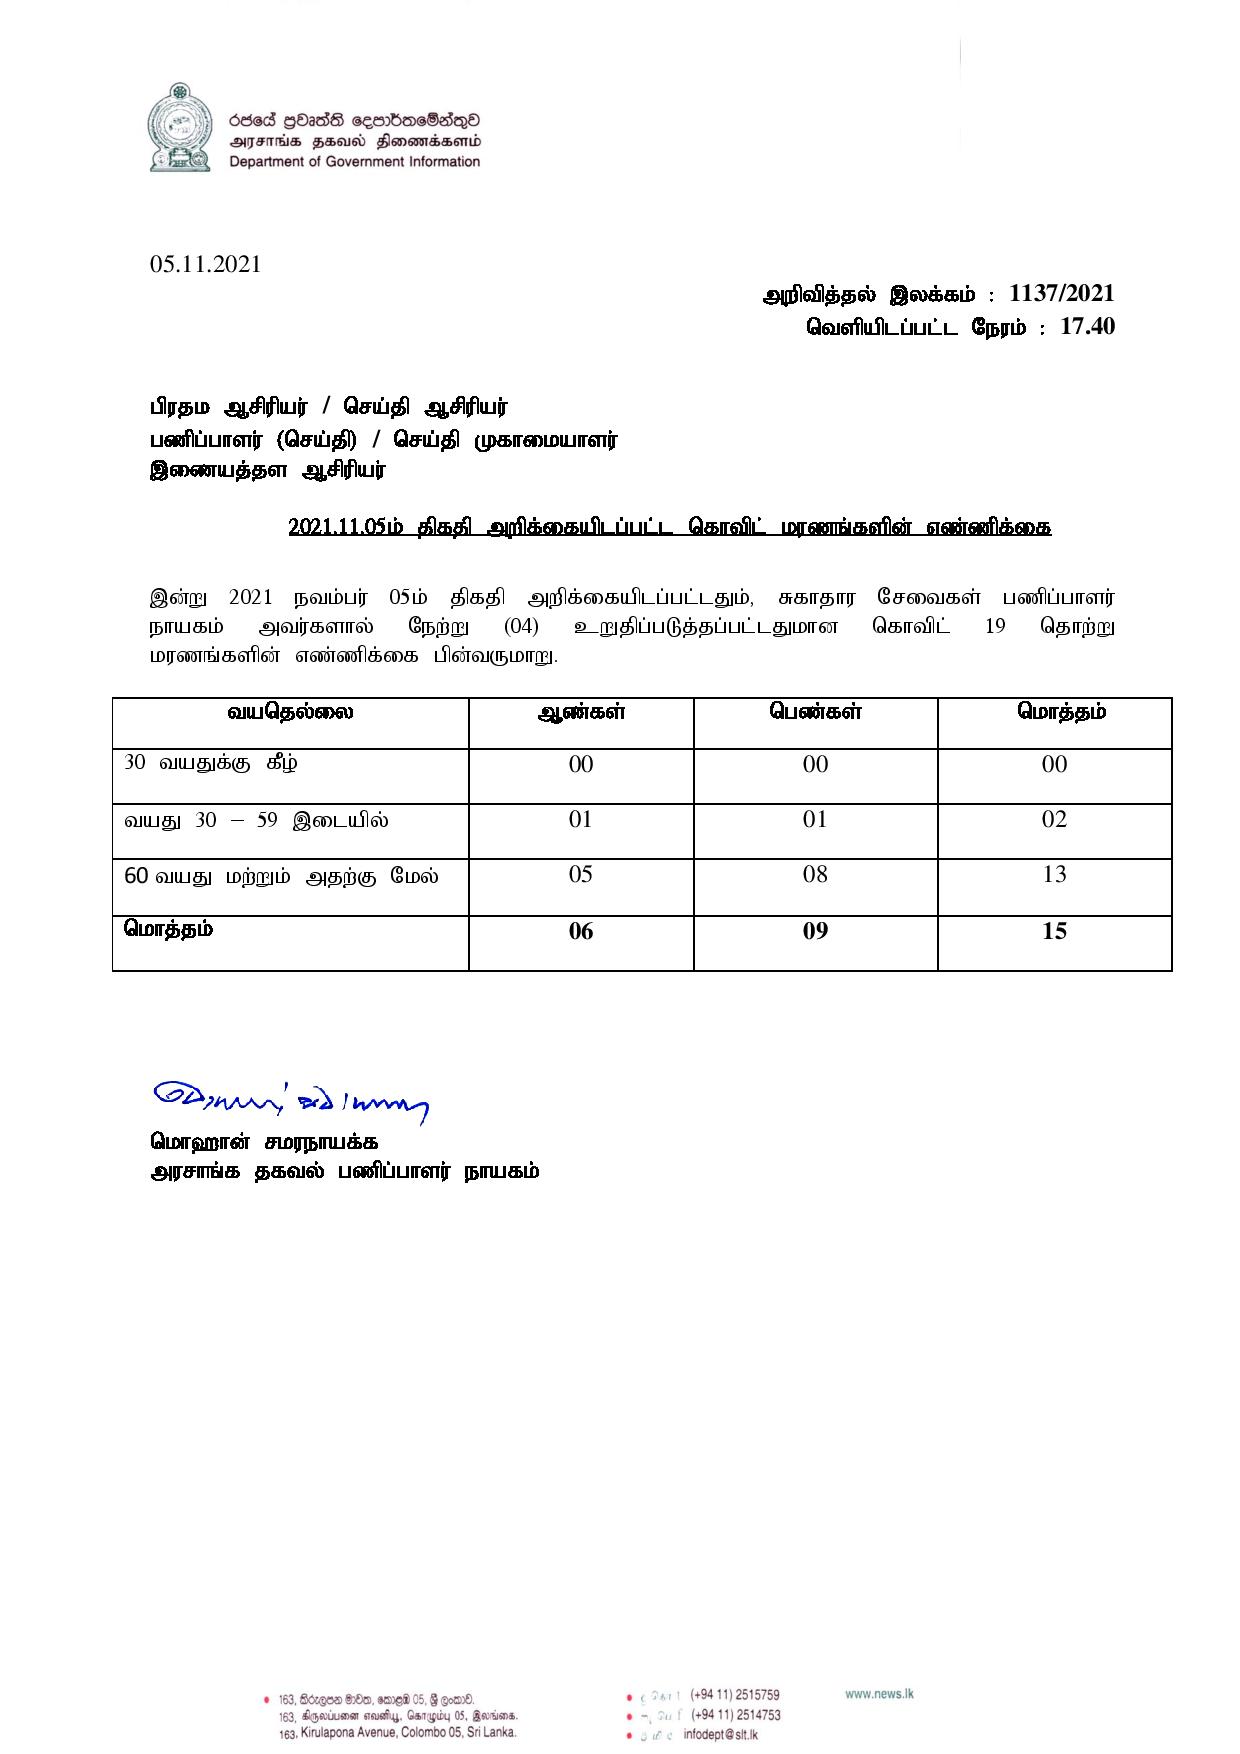 Release No 1137 Tamil page 001